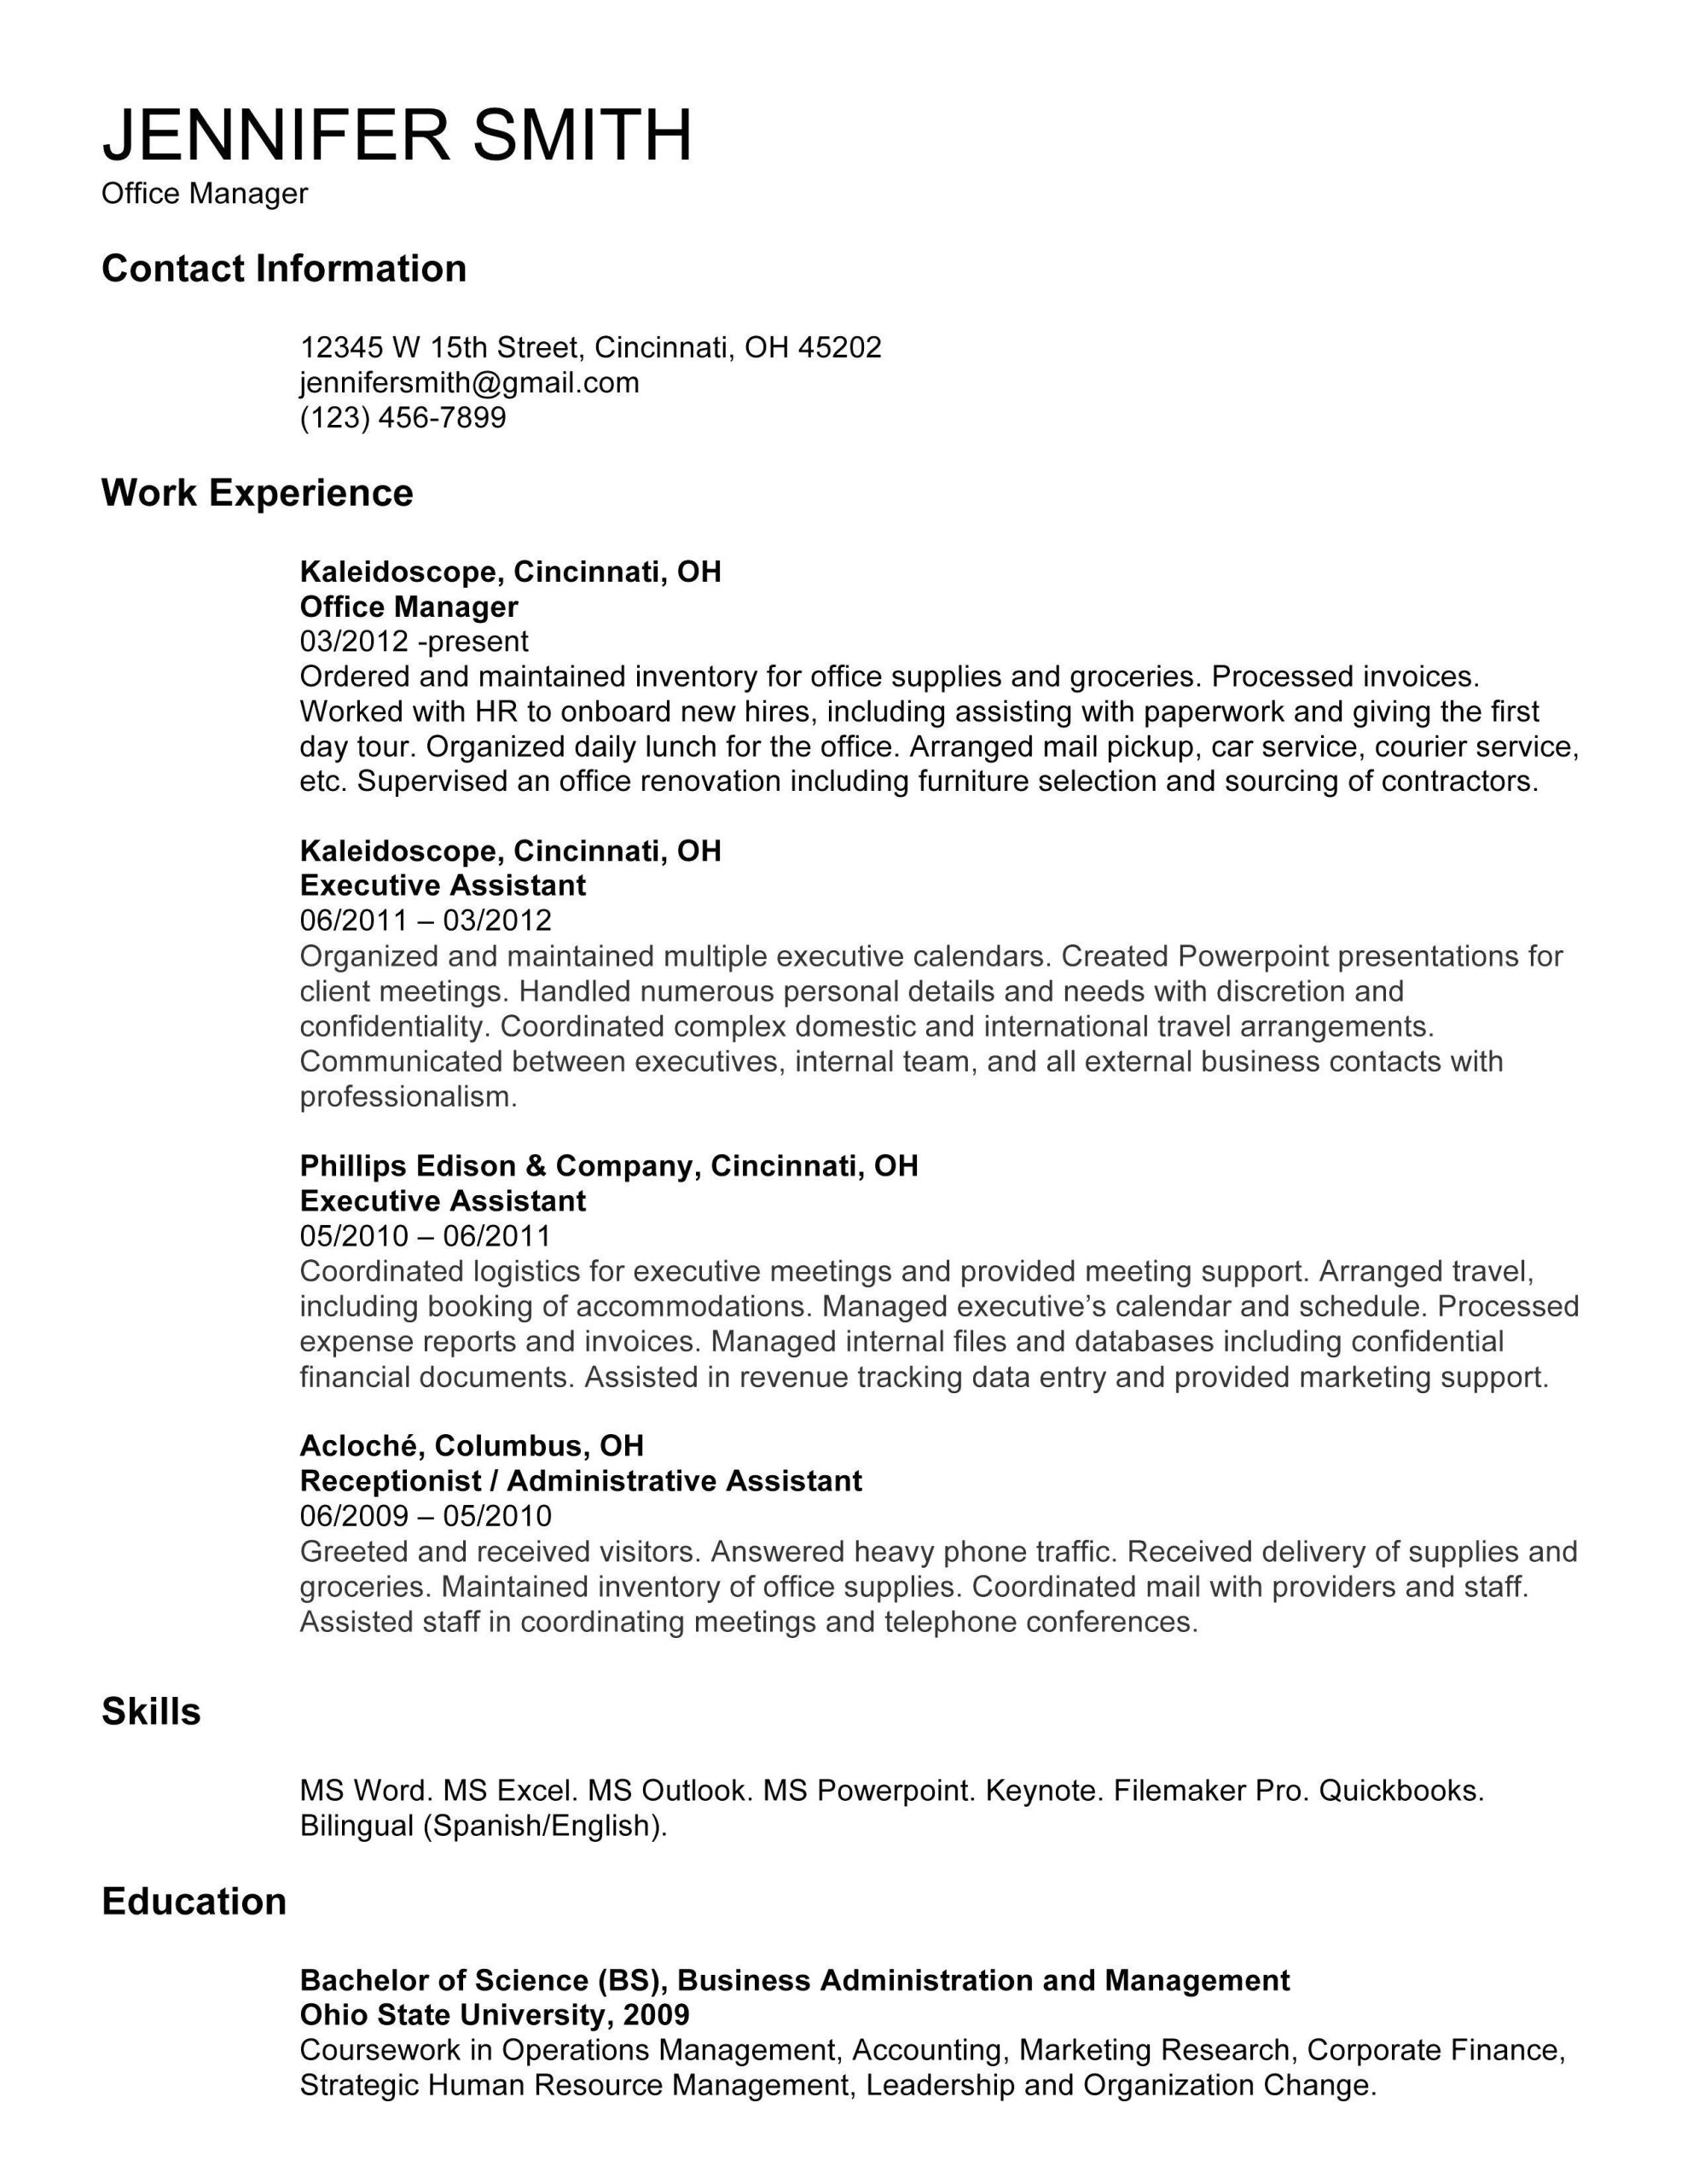 Sample Resume with Multiple Positions at Same Company Pin On Resume Templates